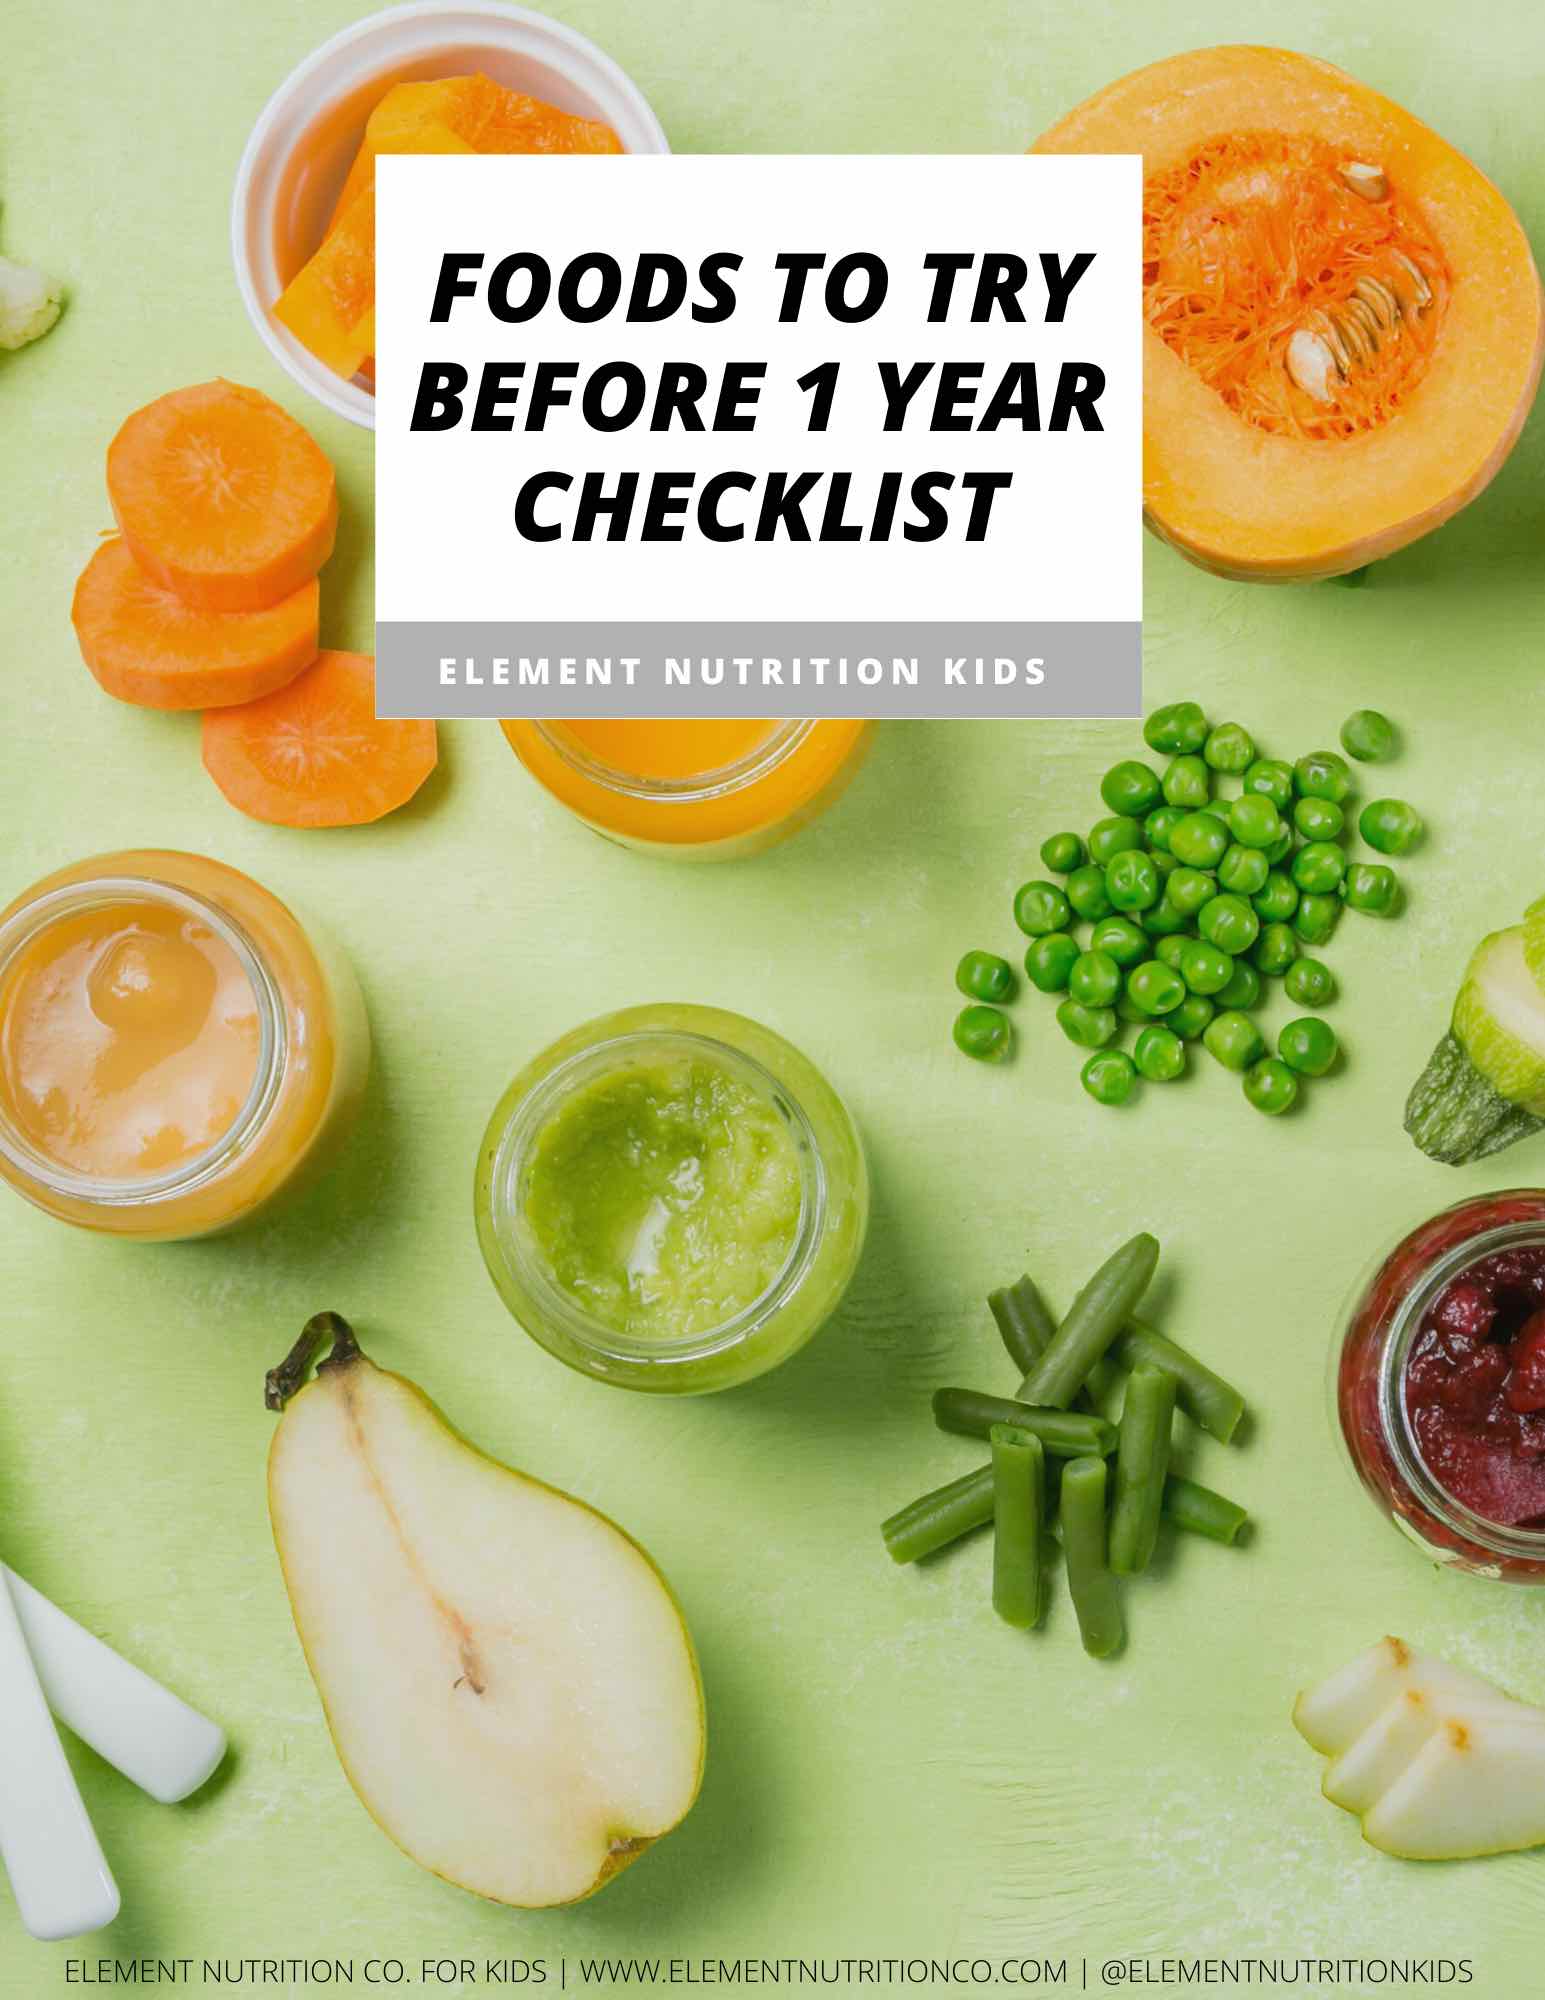 Foods to try before one year checklist